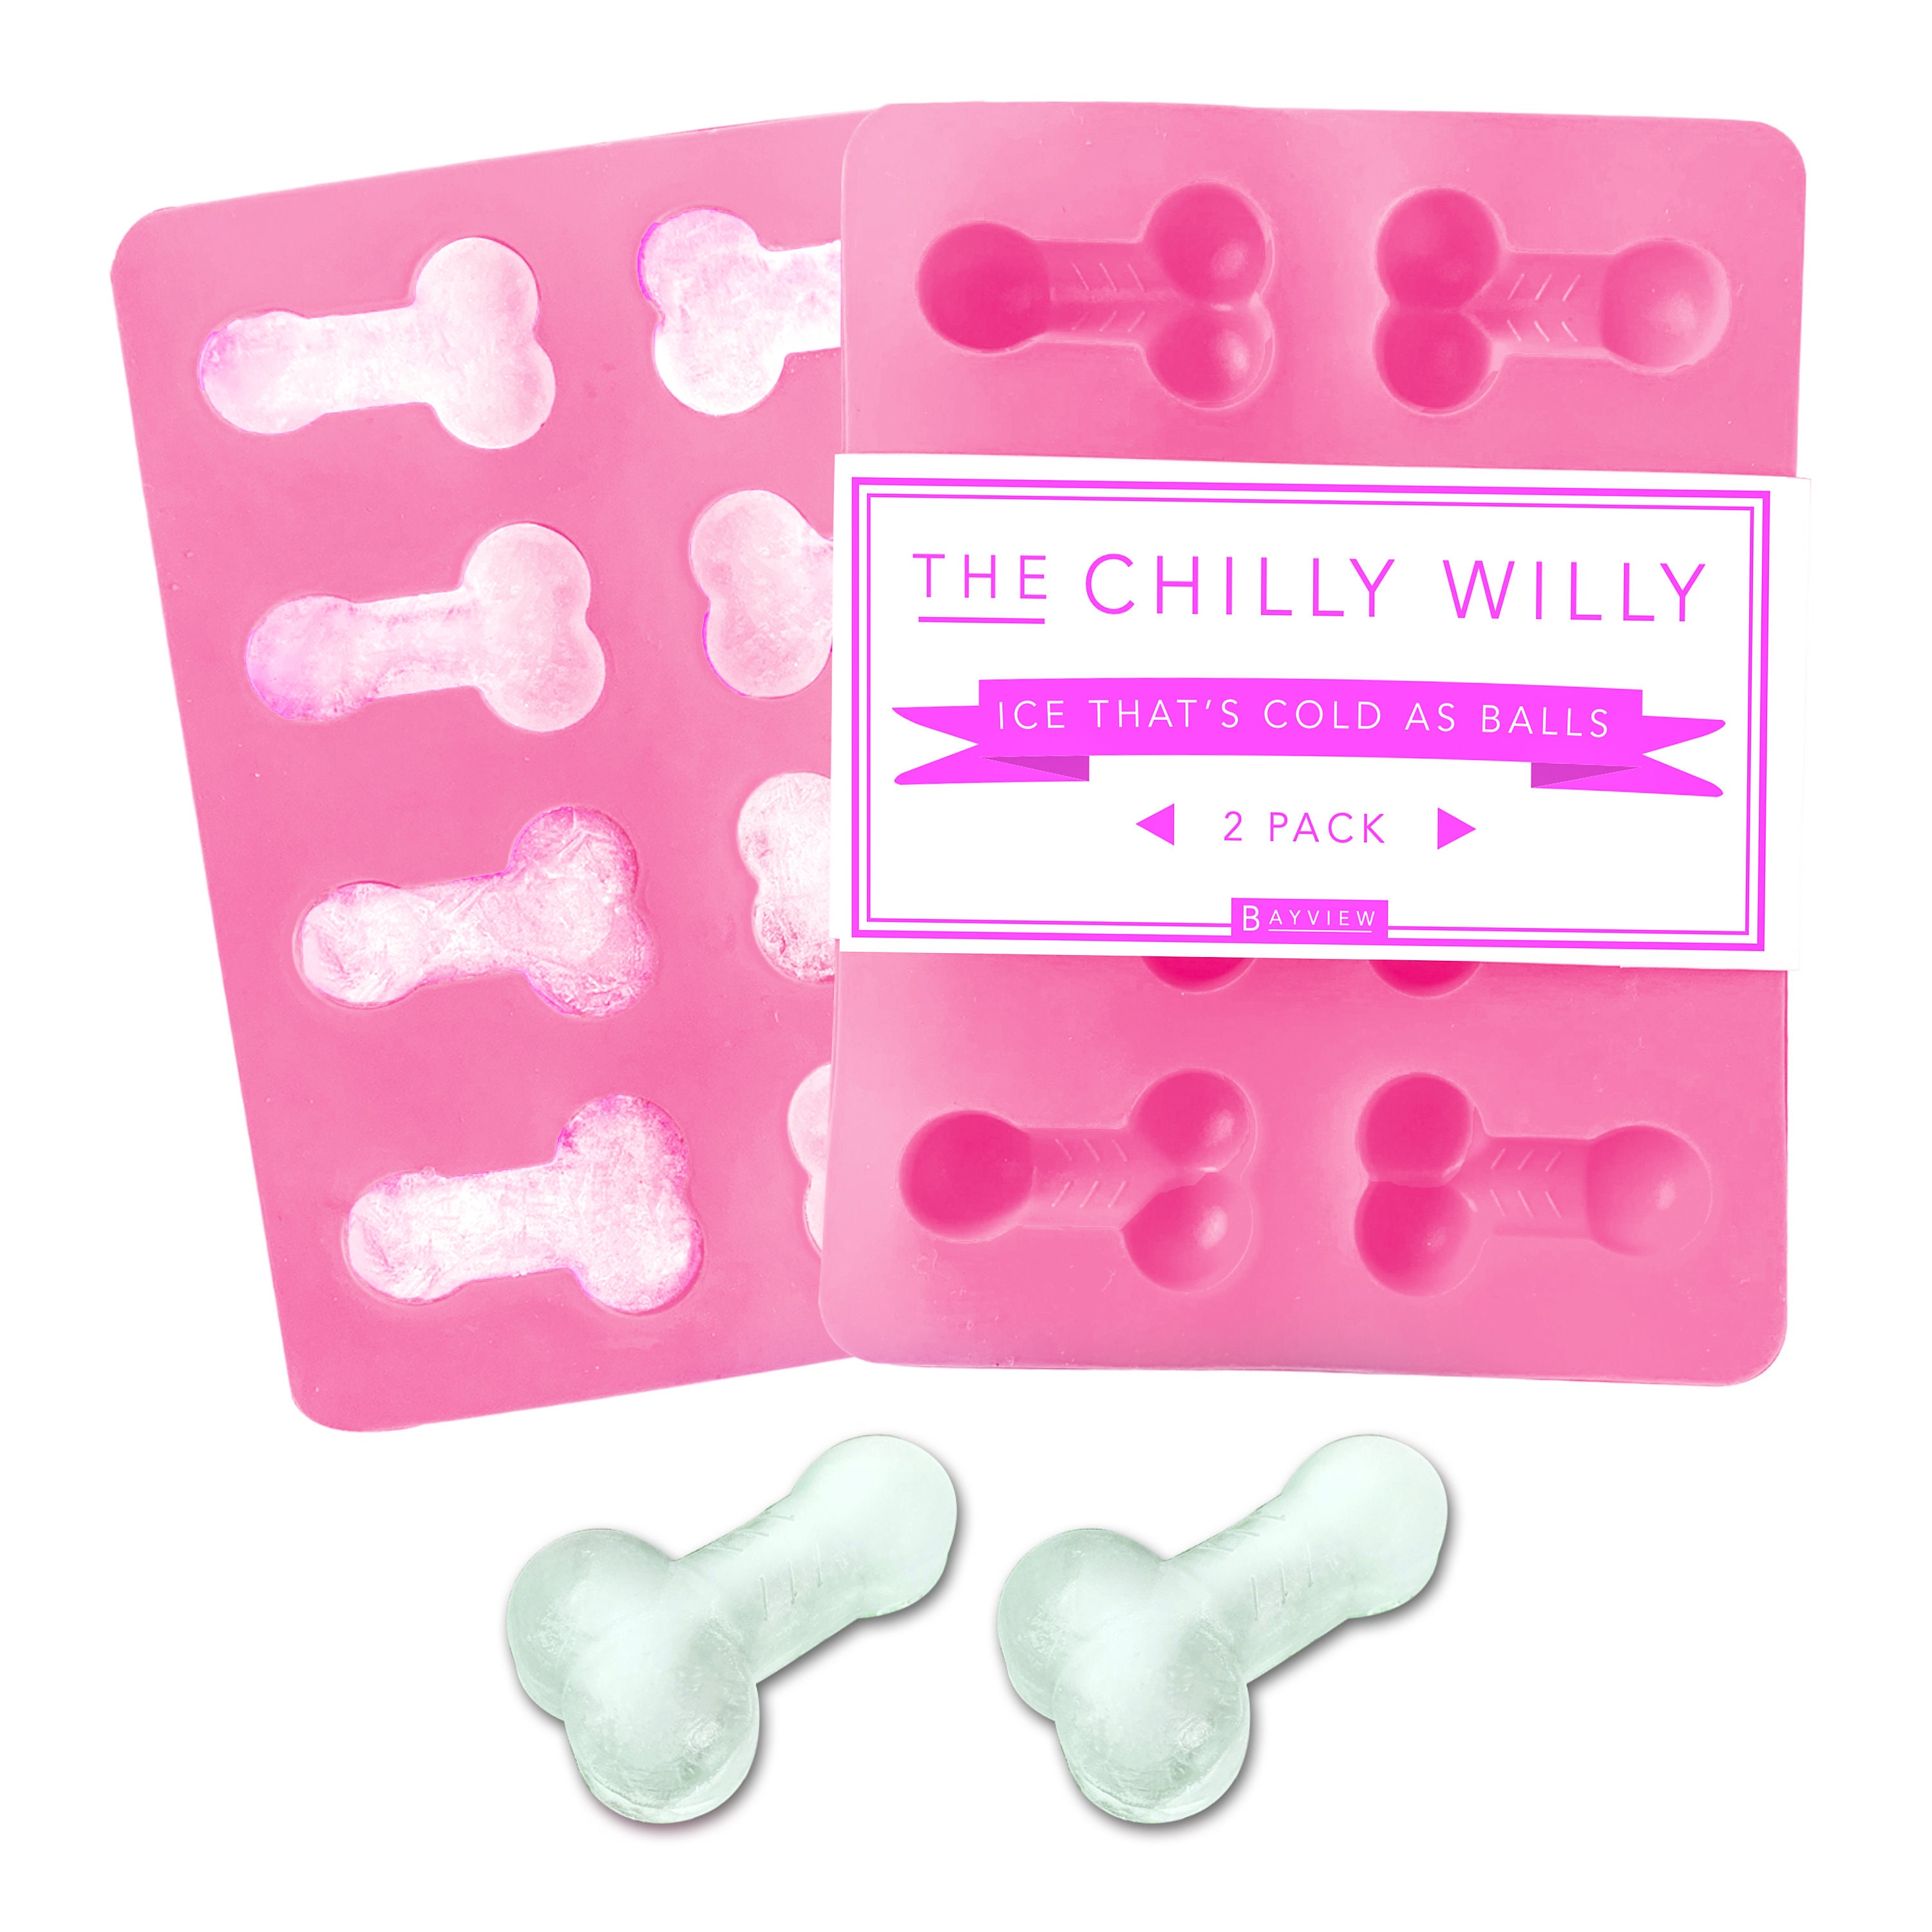 2 PENIS Ice Cube Trays Penis Bachelorette Penis Chocolate Penis Mold DIY  Penis Silly Willy Party Chilly Willy Funny Ice Cubes -  Israel